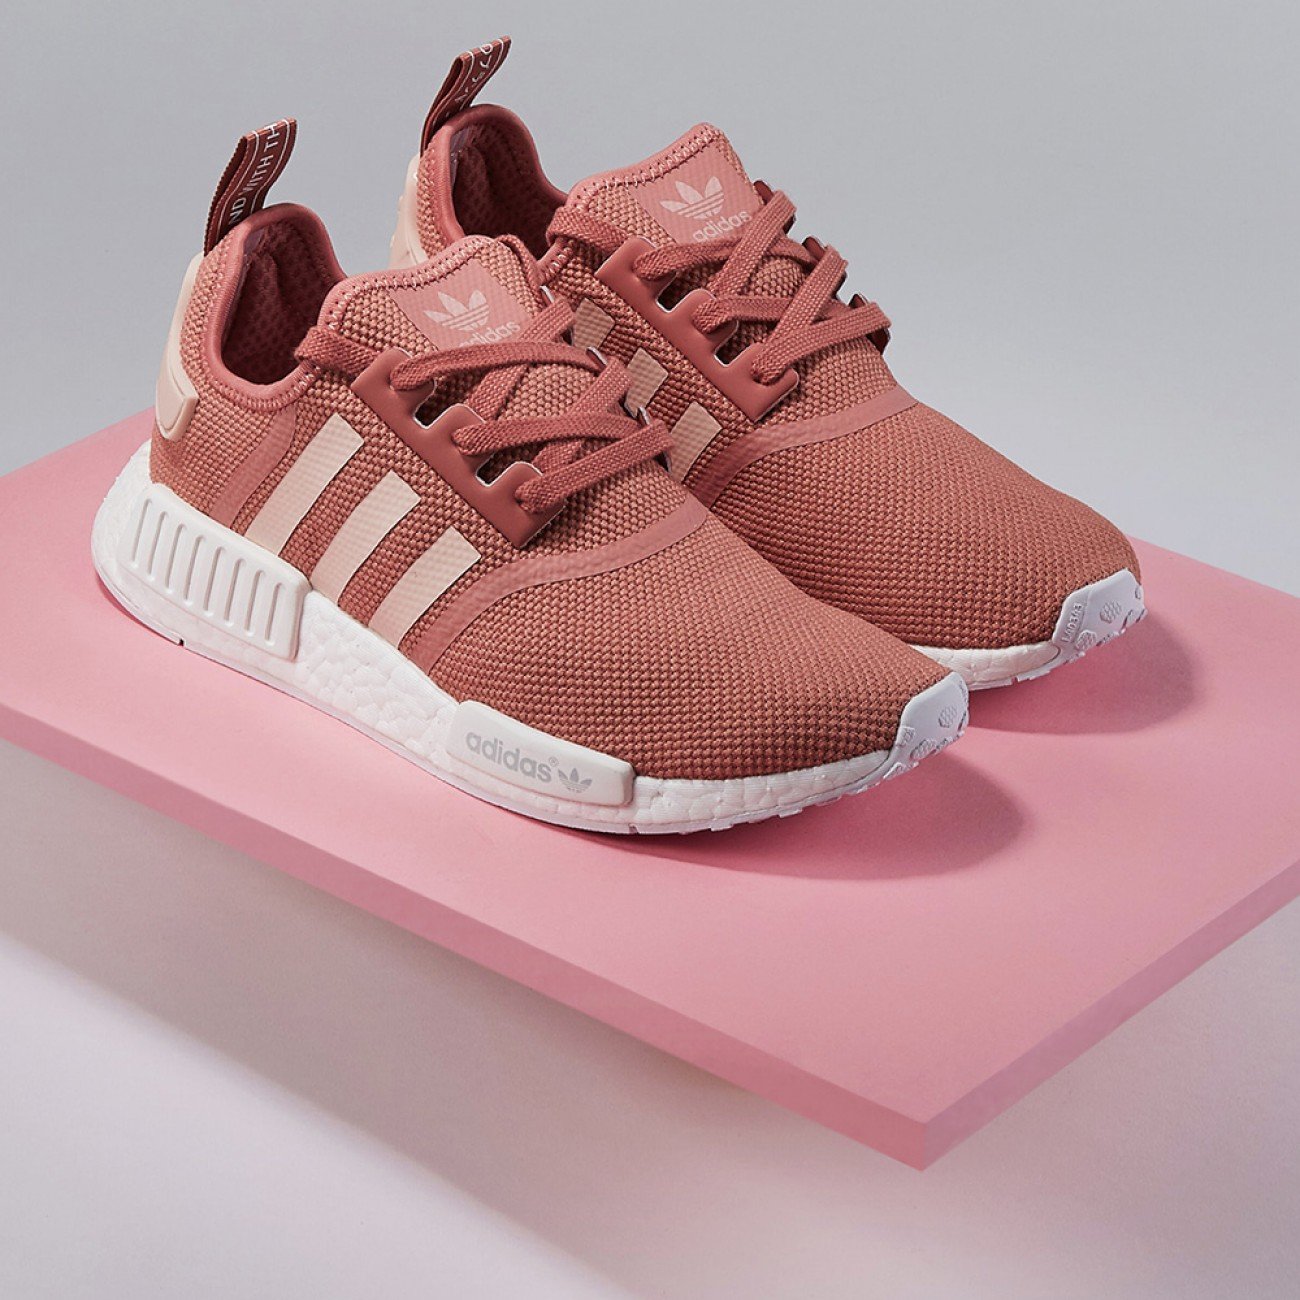 nmd r1 pink cheap